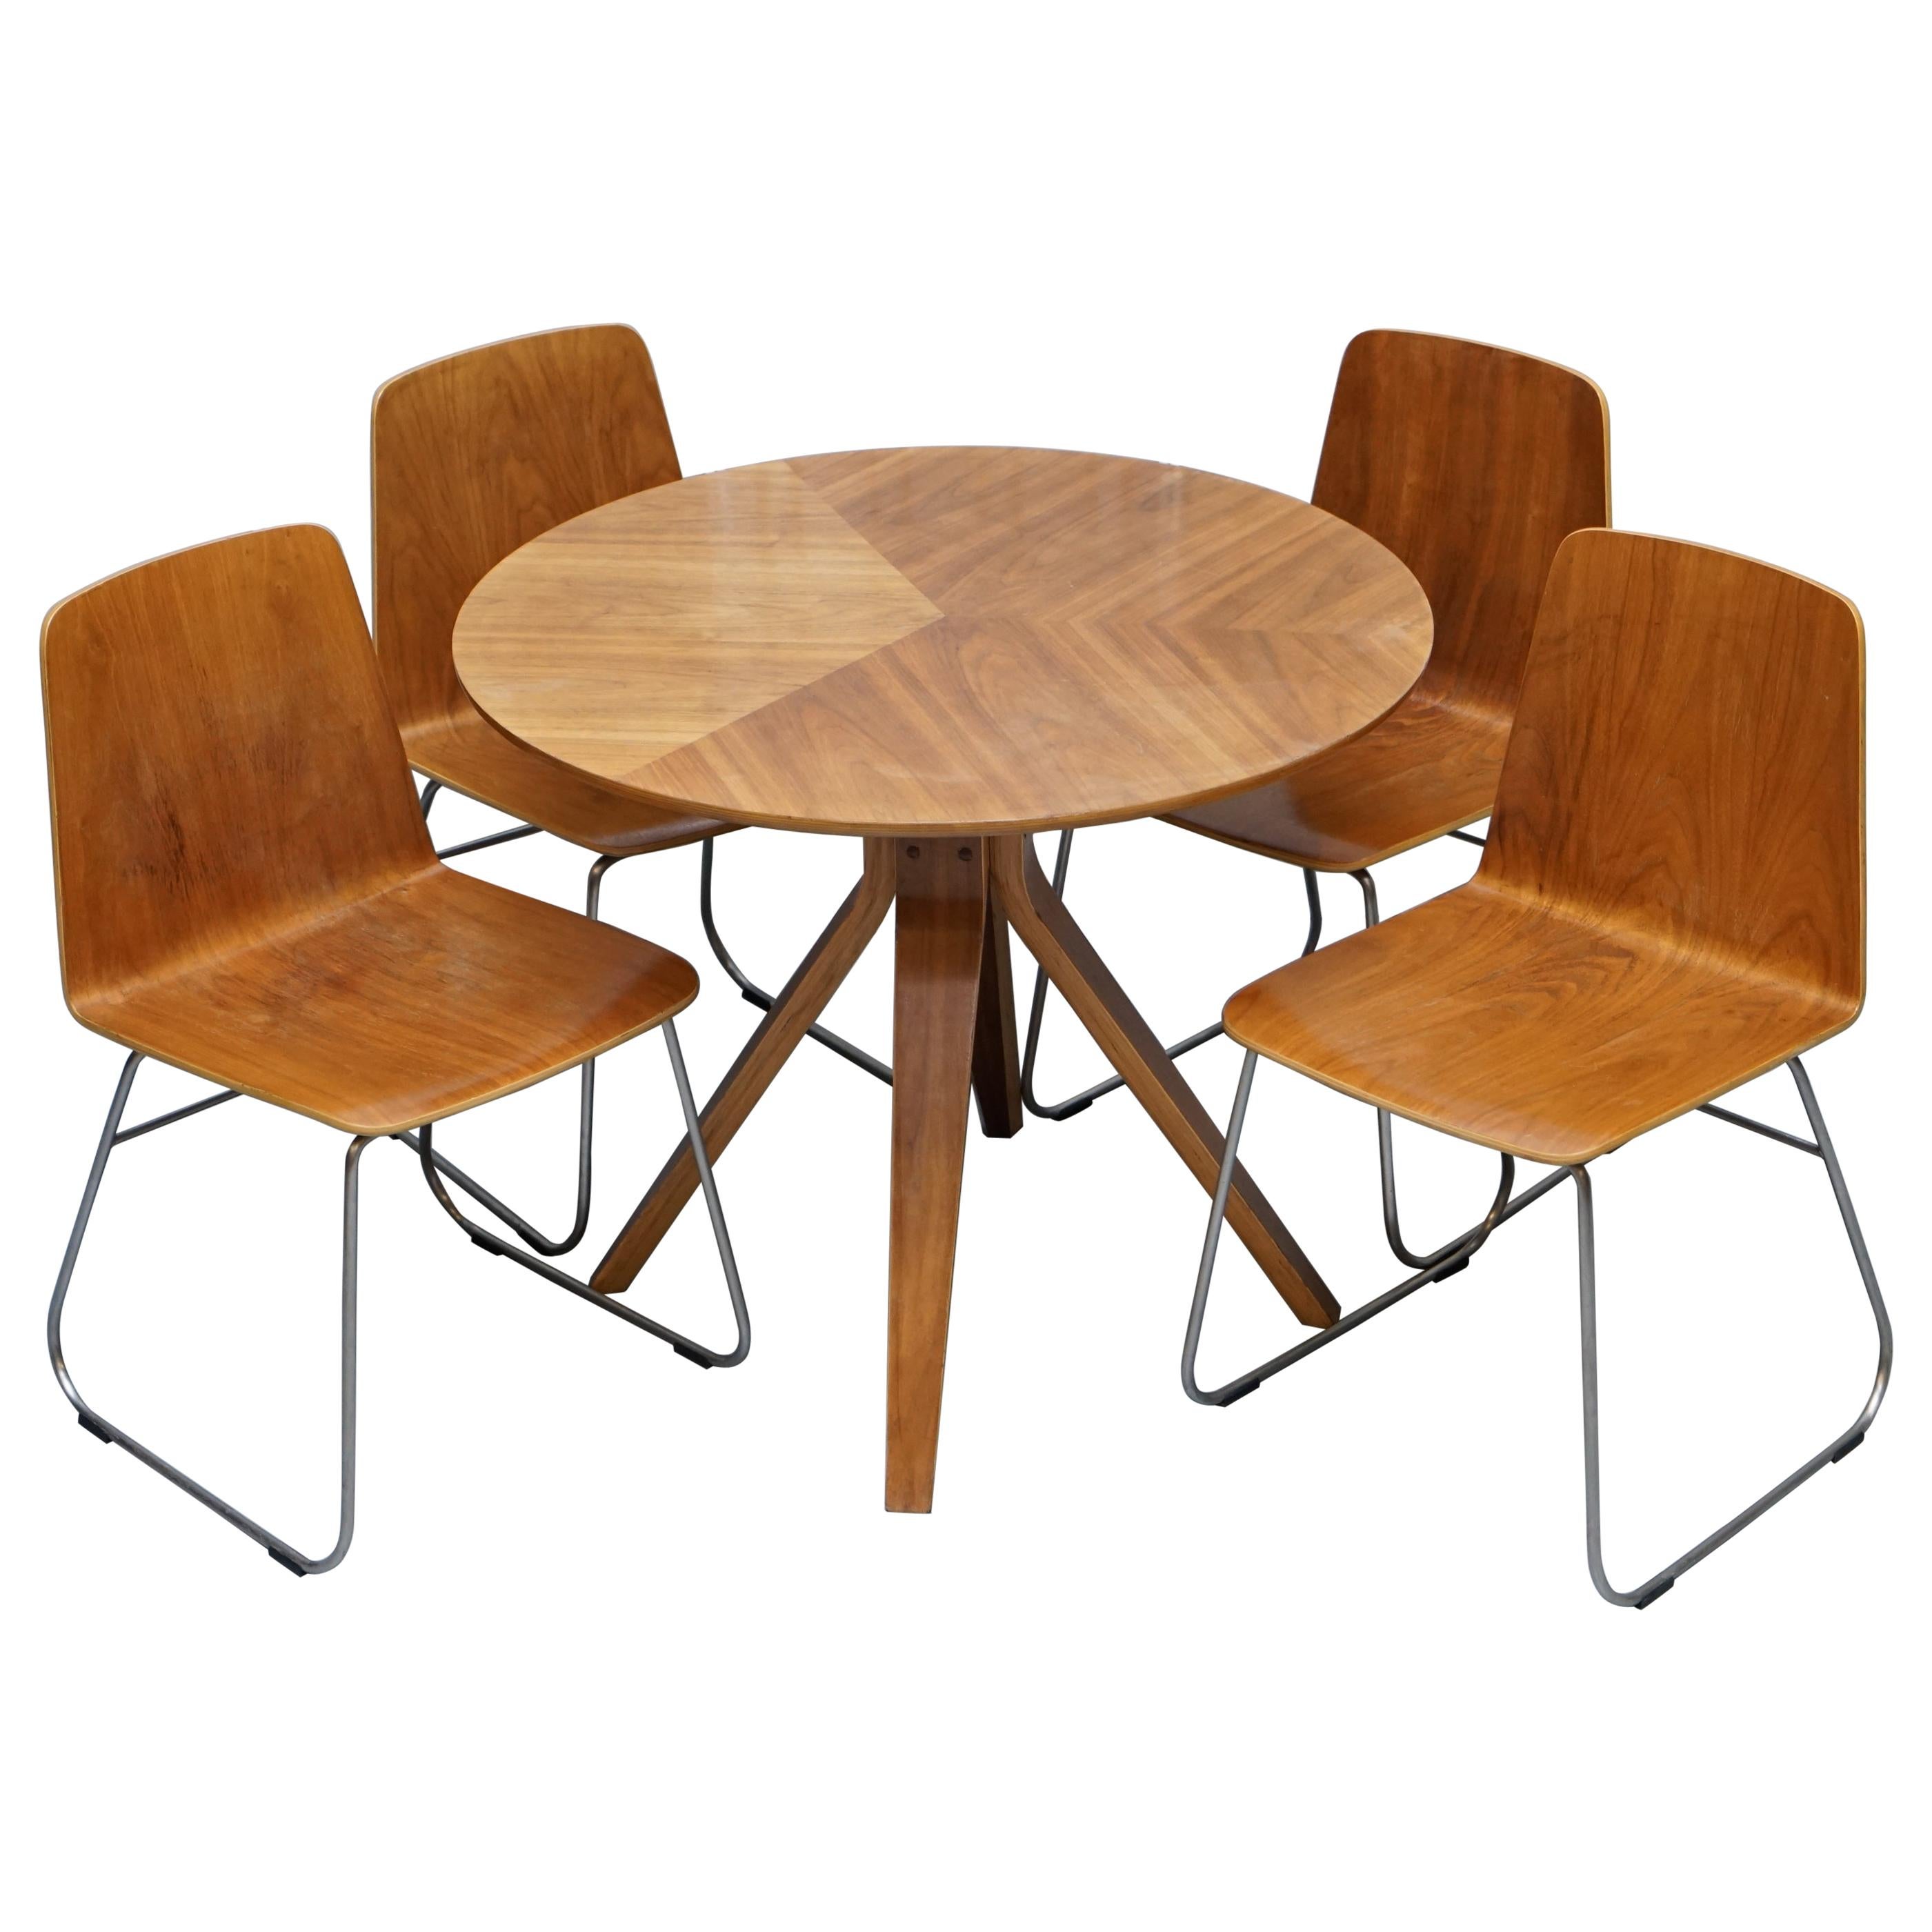 Mid-Century Modern Bent Plywood Dining Table and Four Chairs with Chrome Bases